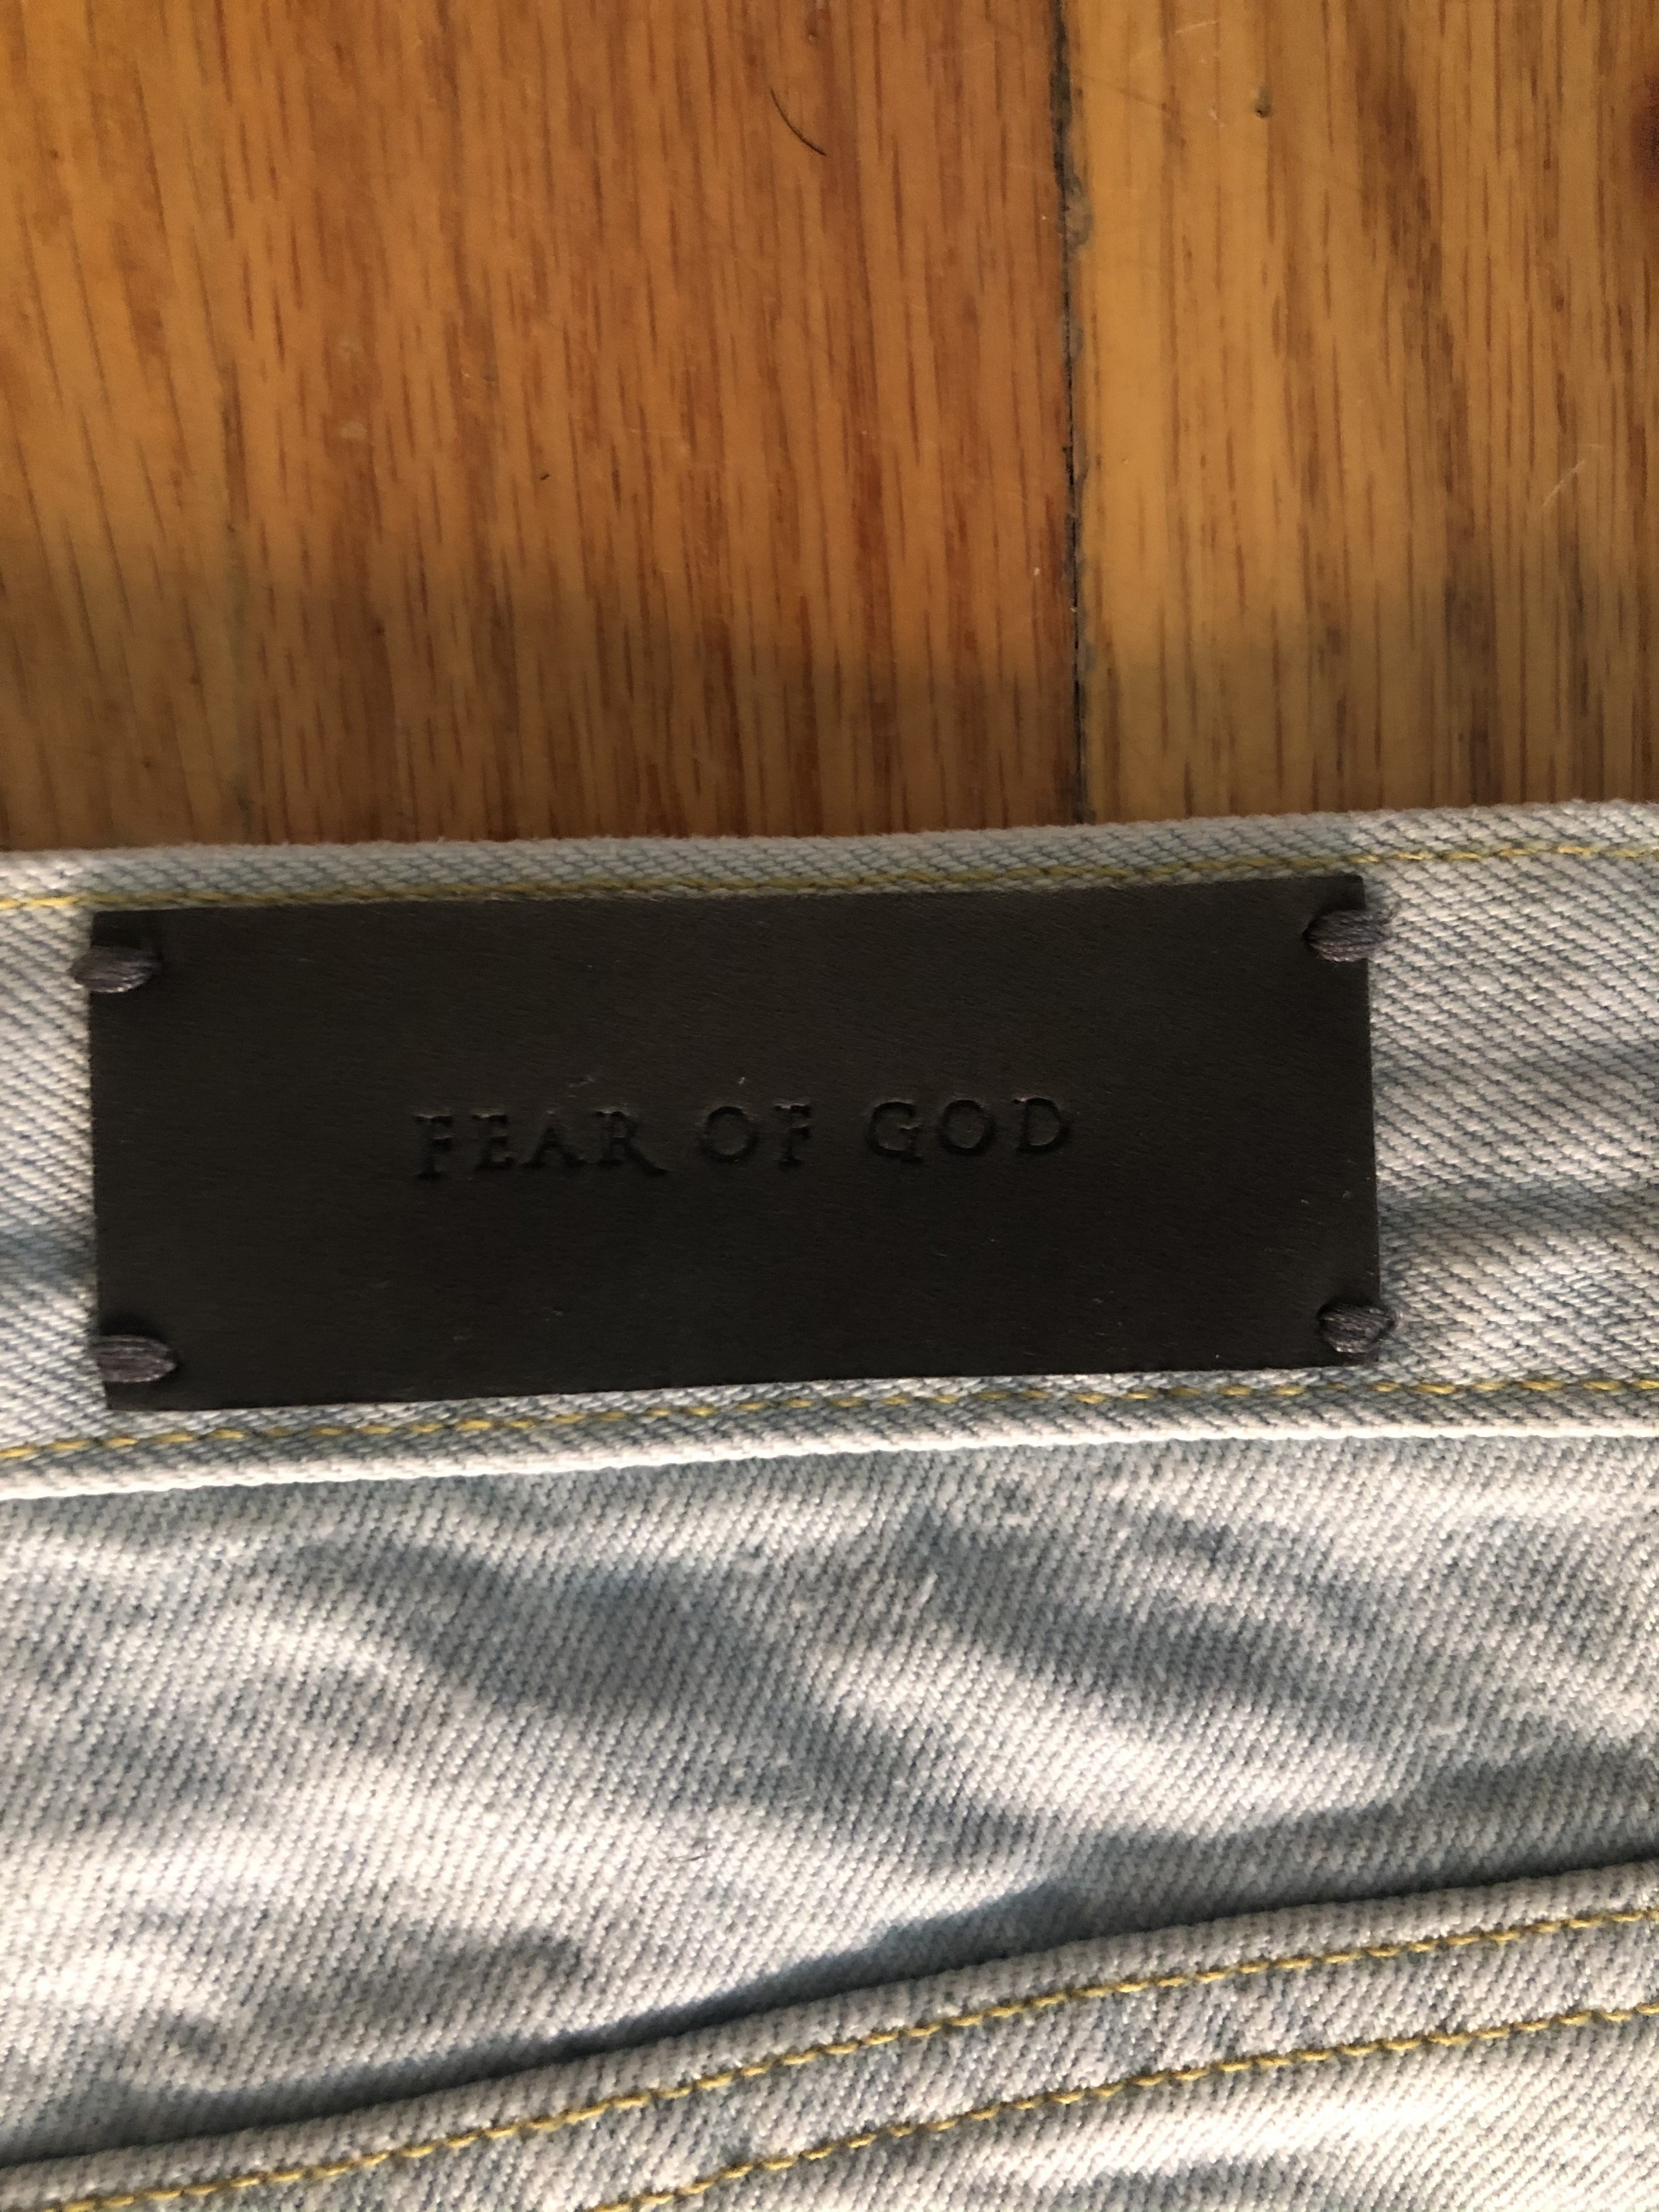 Fear of God Jeans Fifth Collection Washed Out Indigo 34 - 4